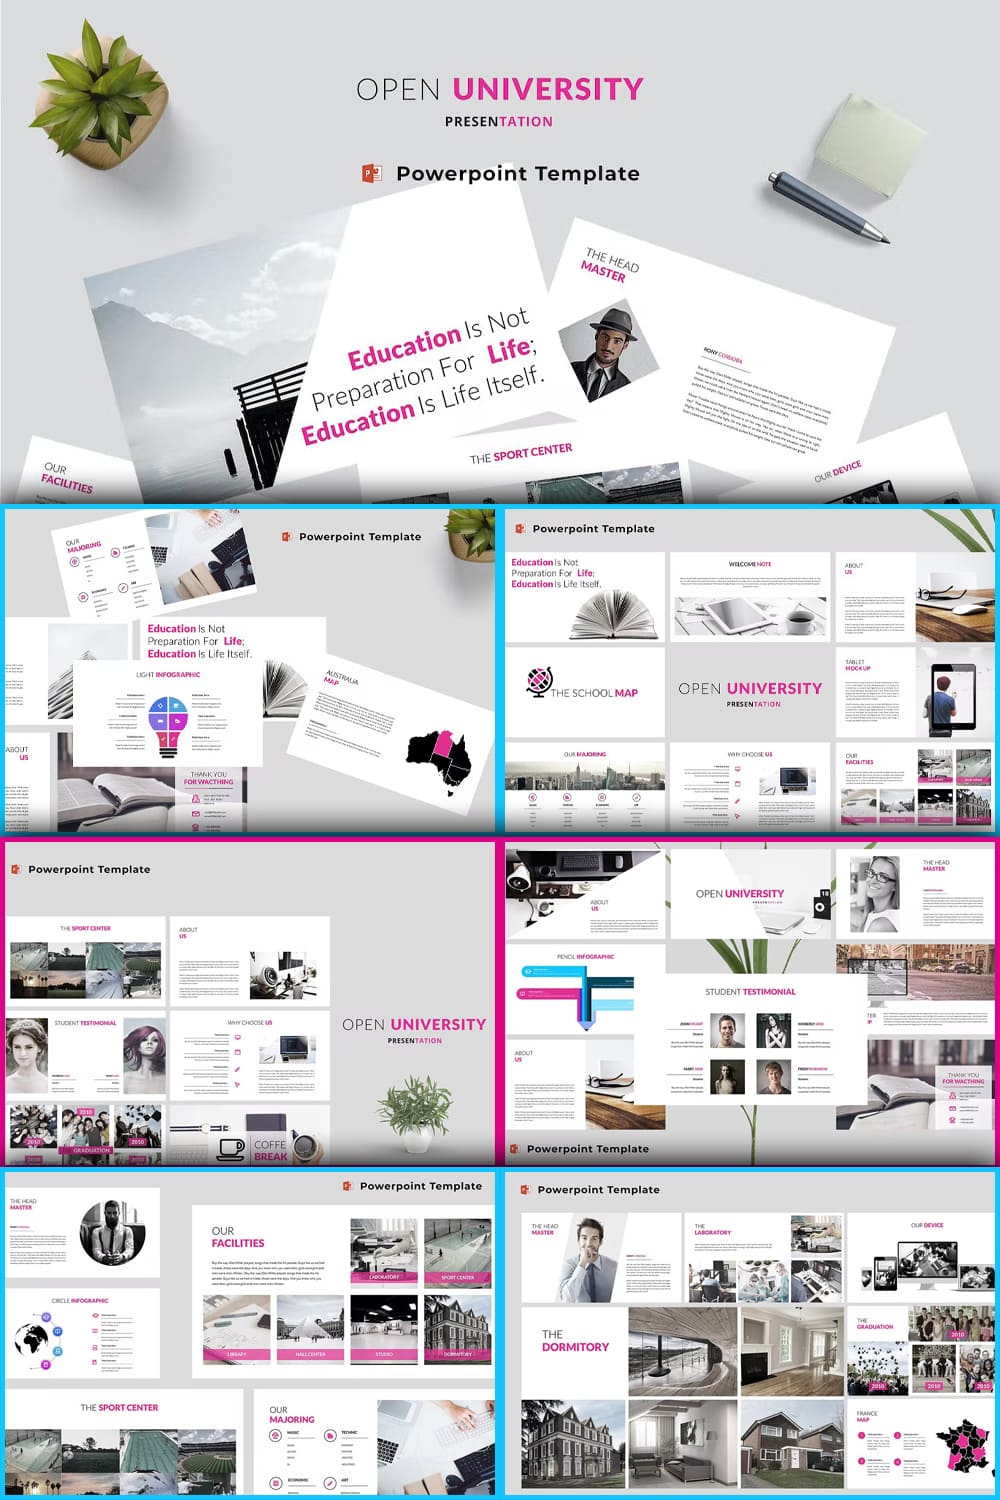 Open University Powerpoint Template - pinterest image preview.